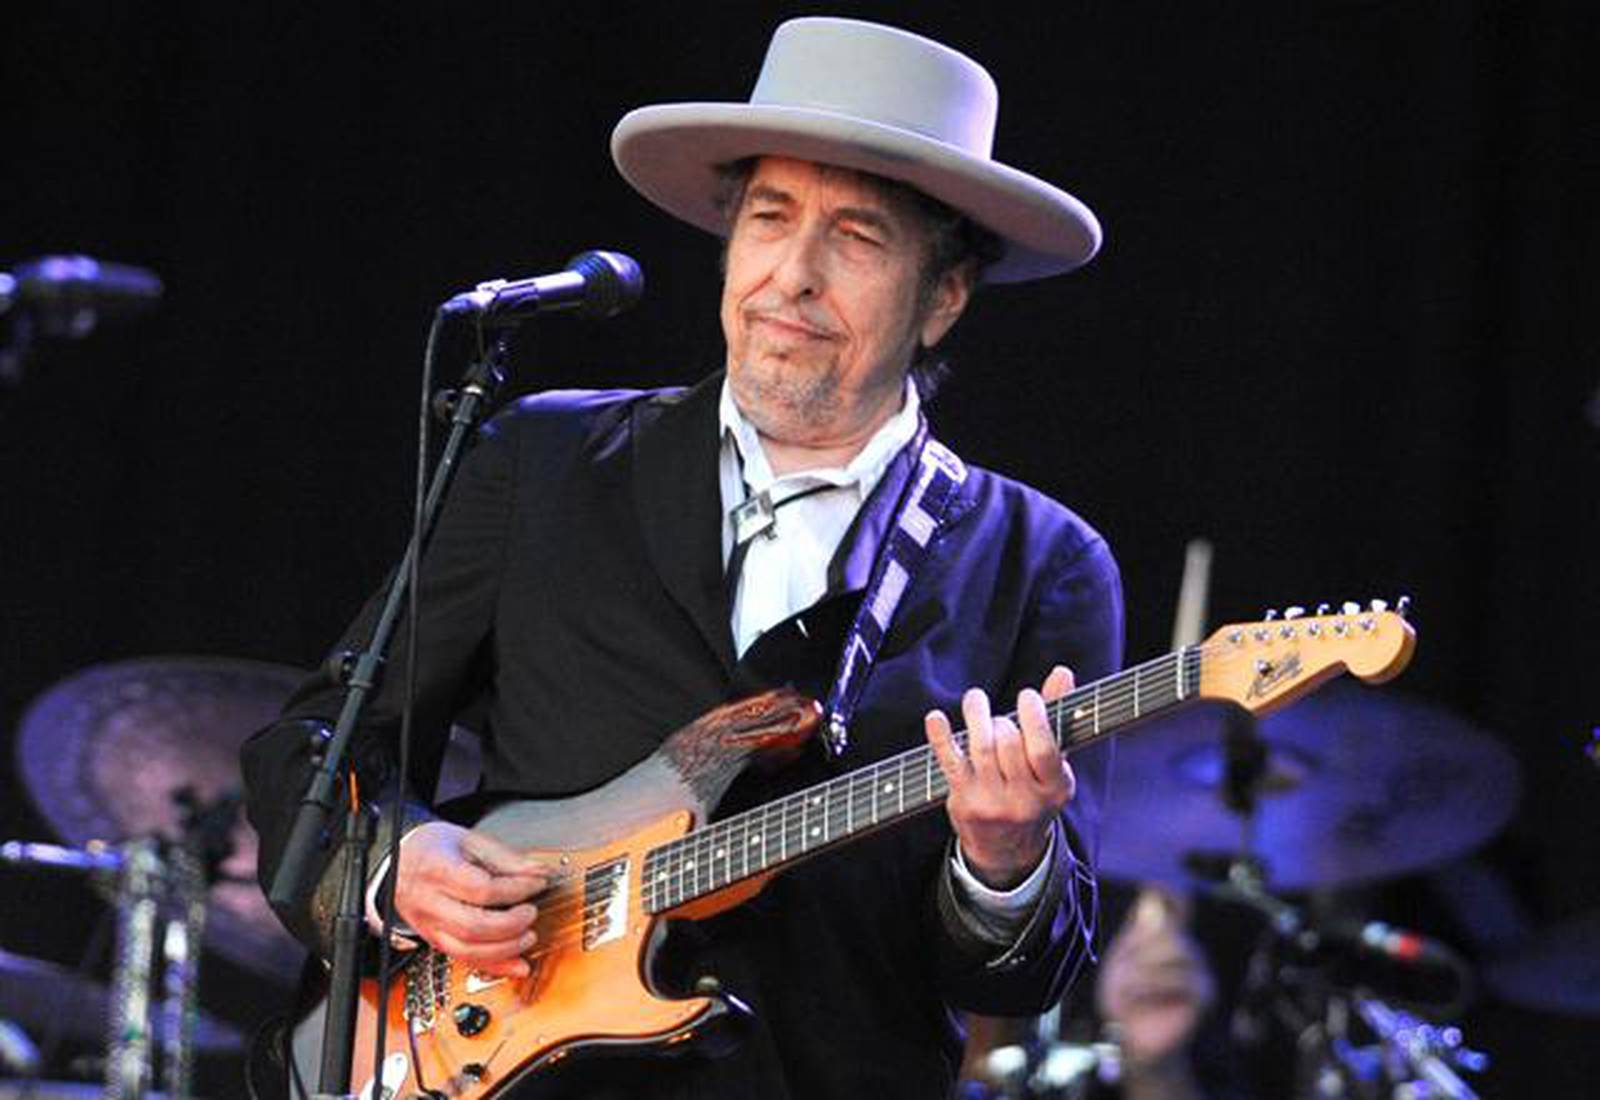 'False Prophet' What is Bob Dylan singing about in his new song?